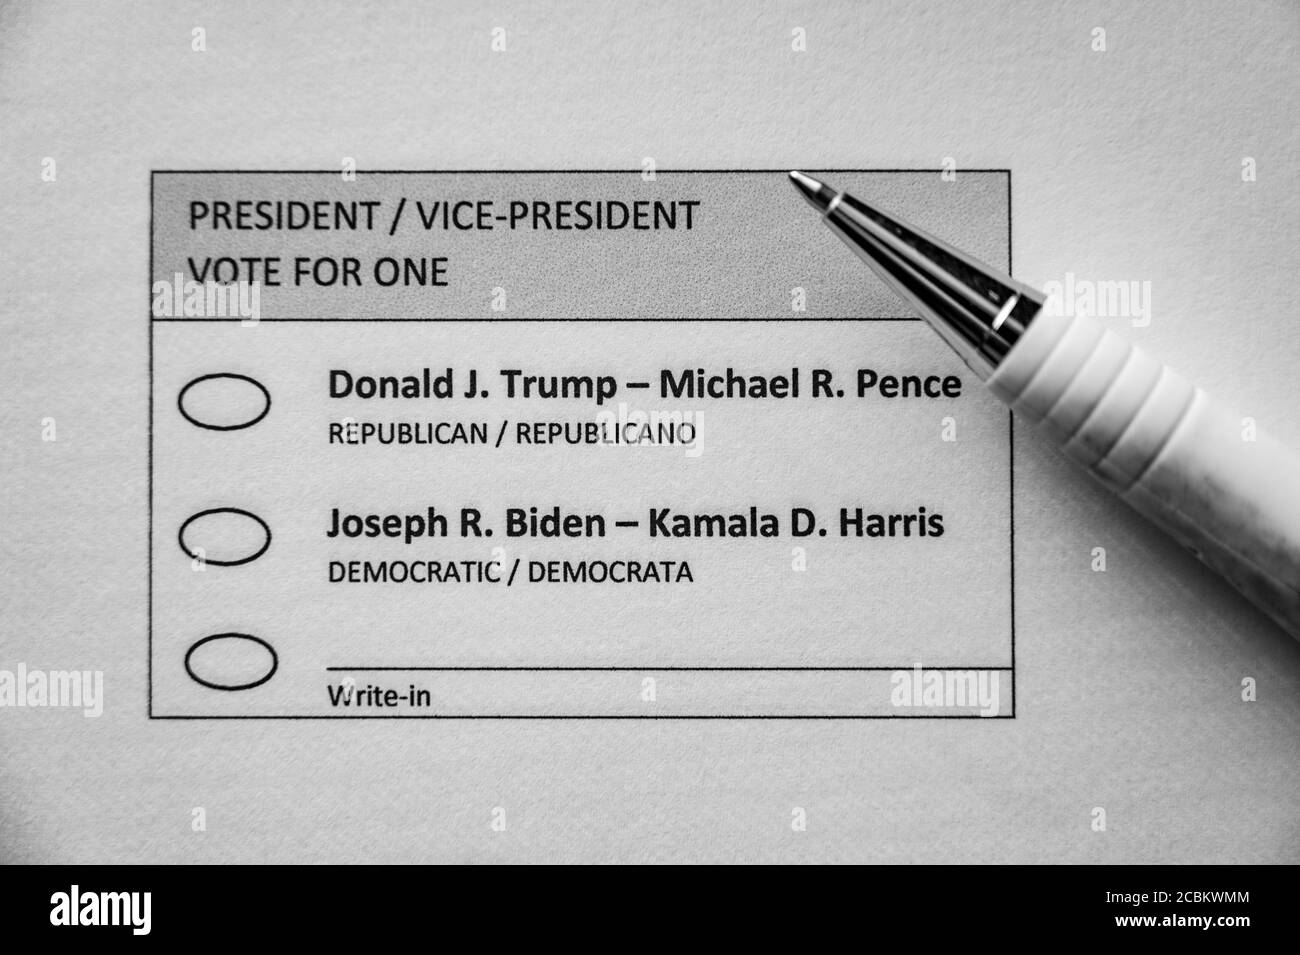 Blank ballot with a pen ready to make a choice for president in the 2020 election Stock Photo